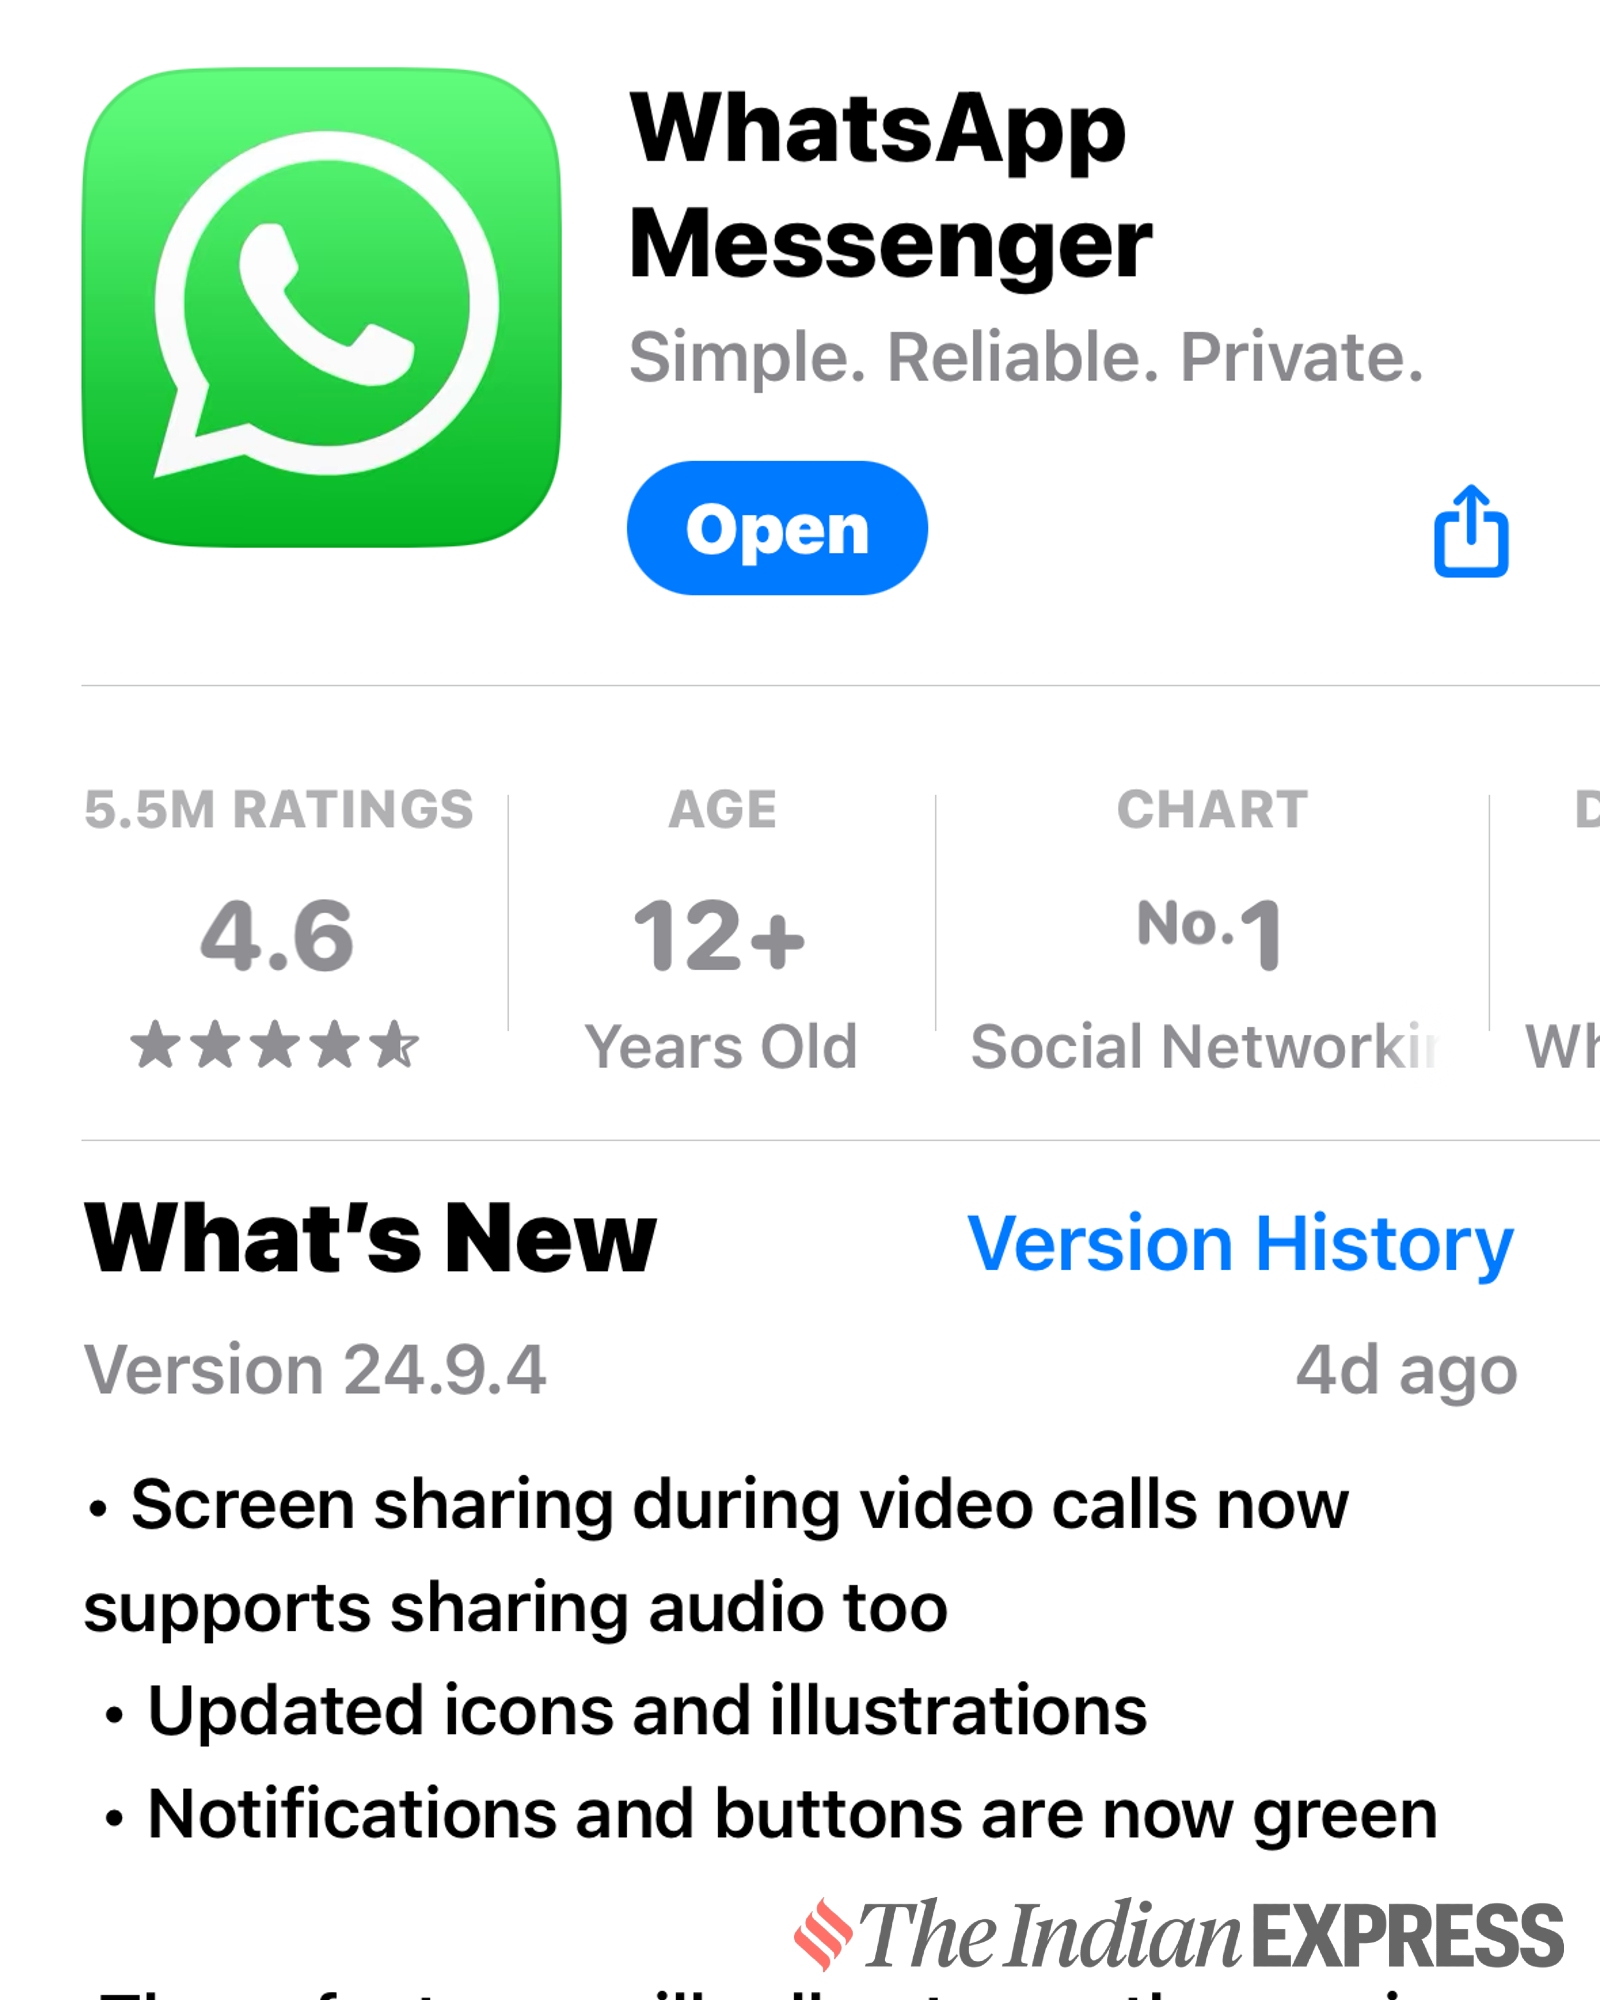 android, iphone whatsapp users can now share screen, audio during video calls